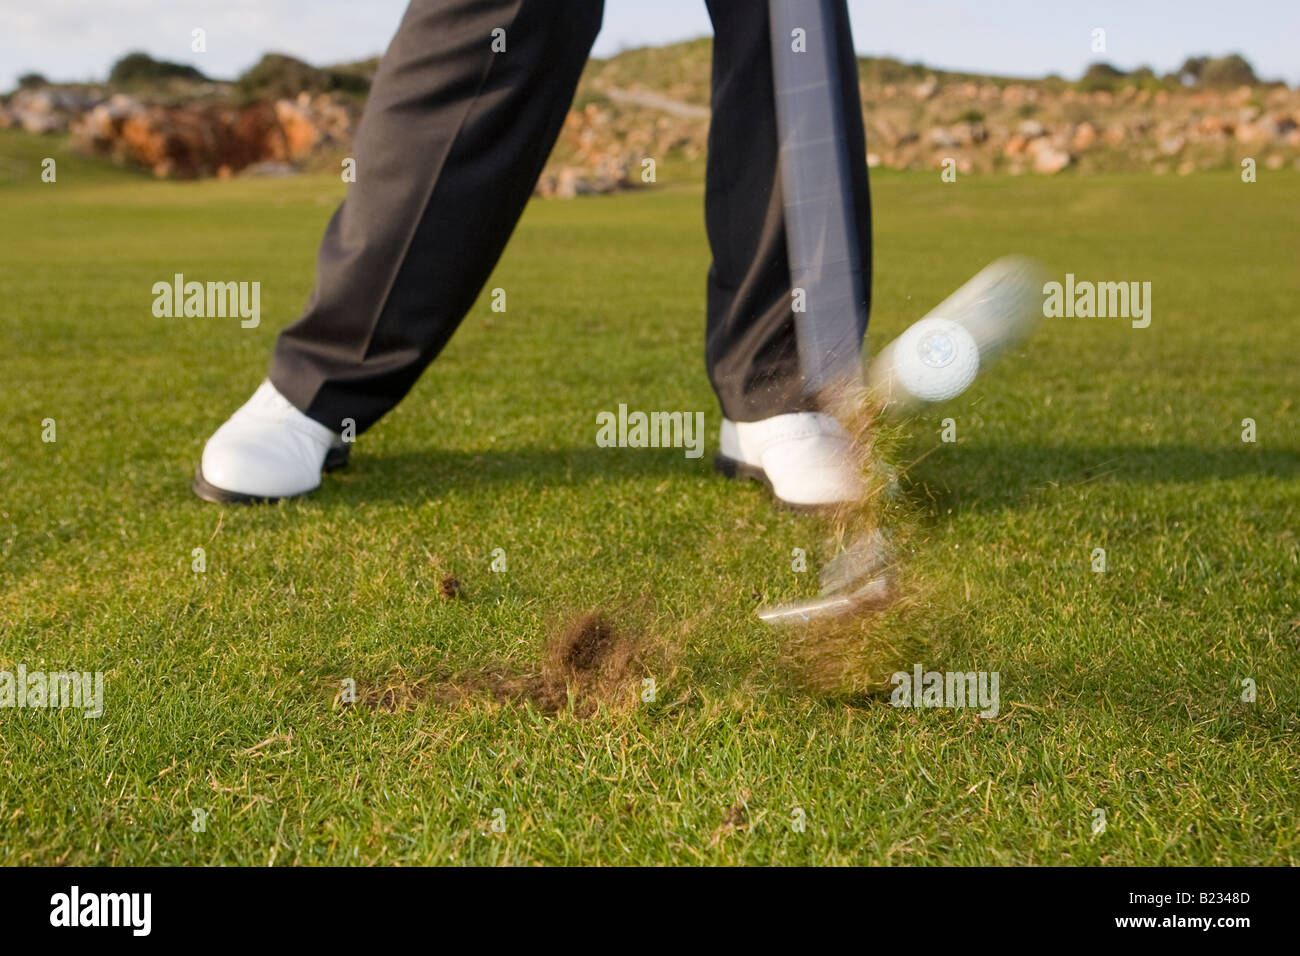 Golfer hitting ball off fairway and making a divot Stock Photo